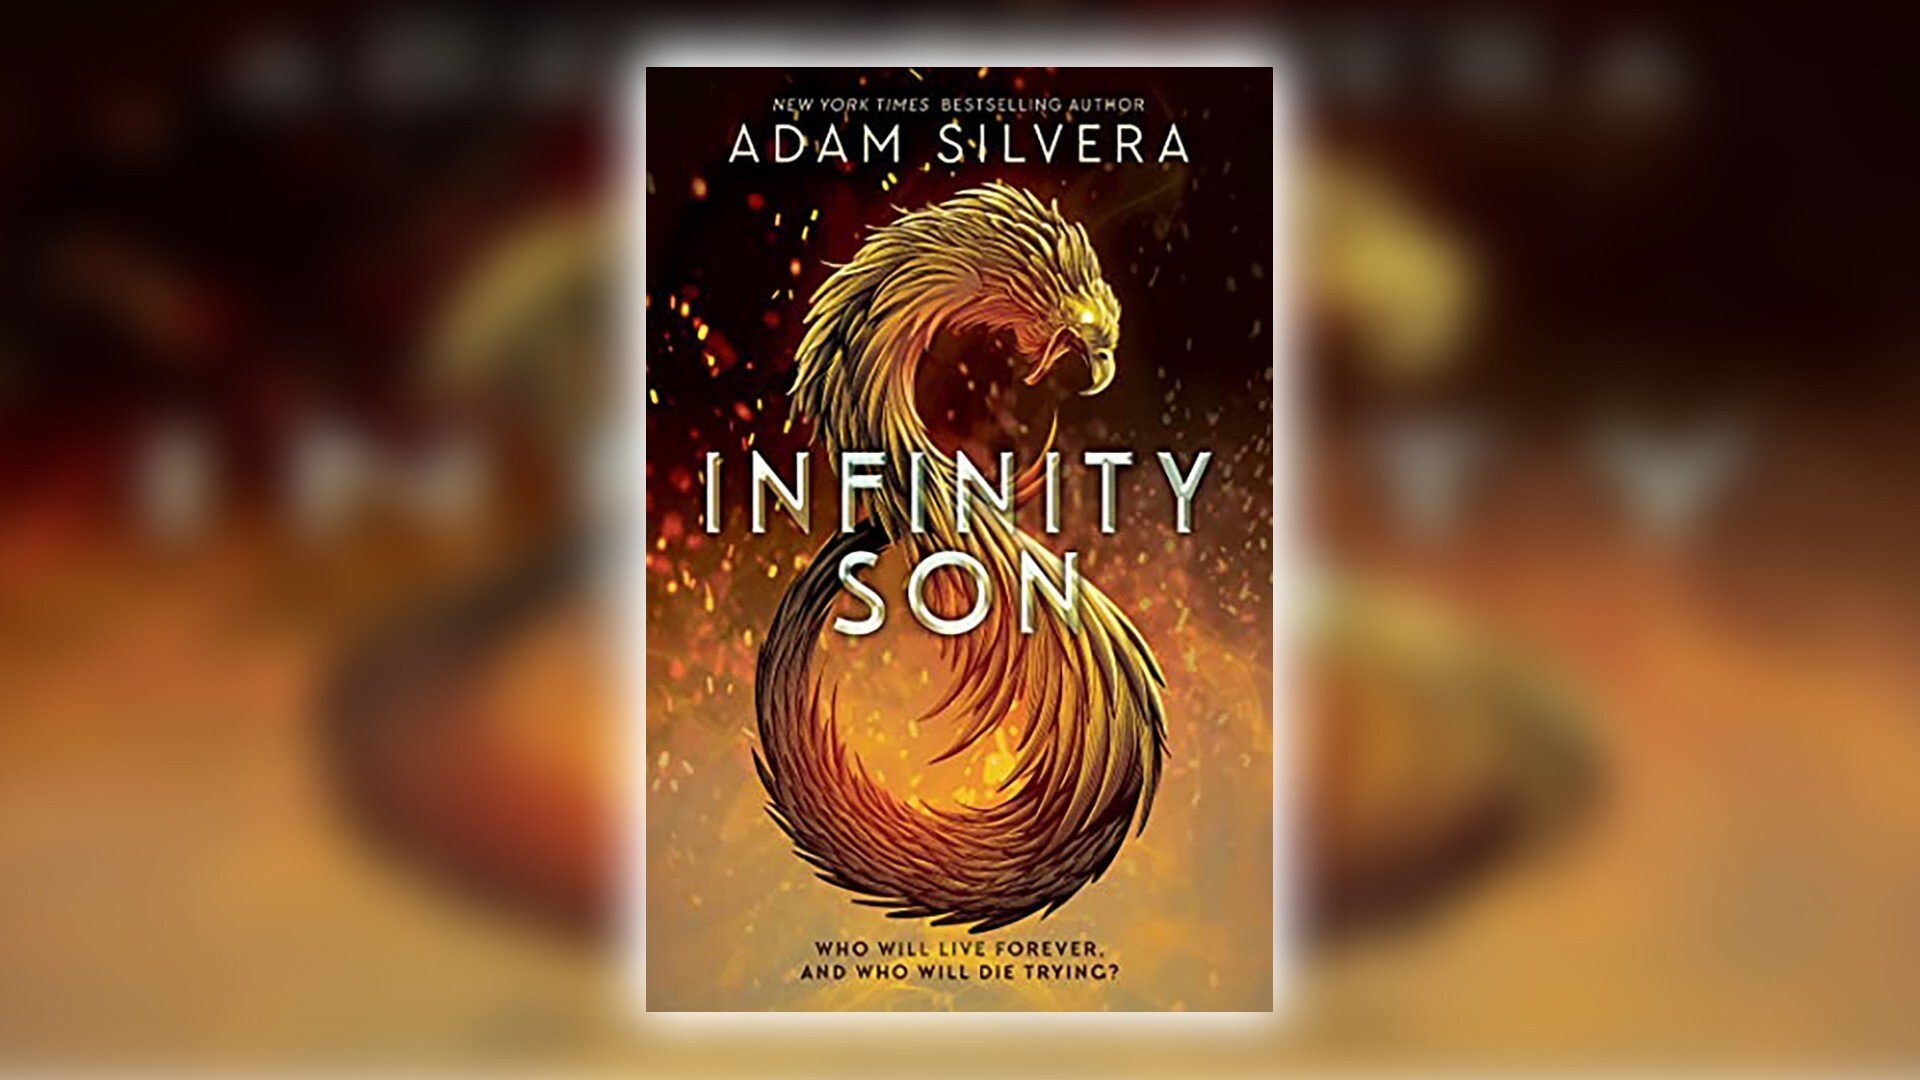 "Infinity Son" is set in an alternative universe in present-day New York City, where magical and non-magical people live alongside each other.